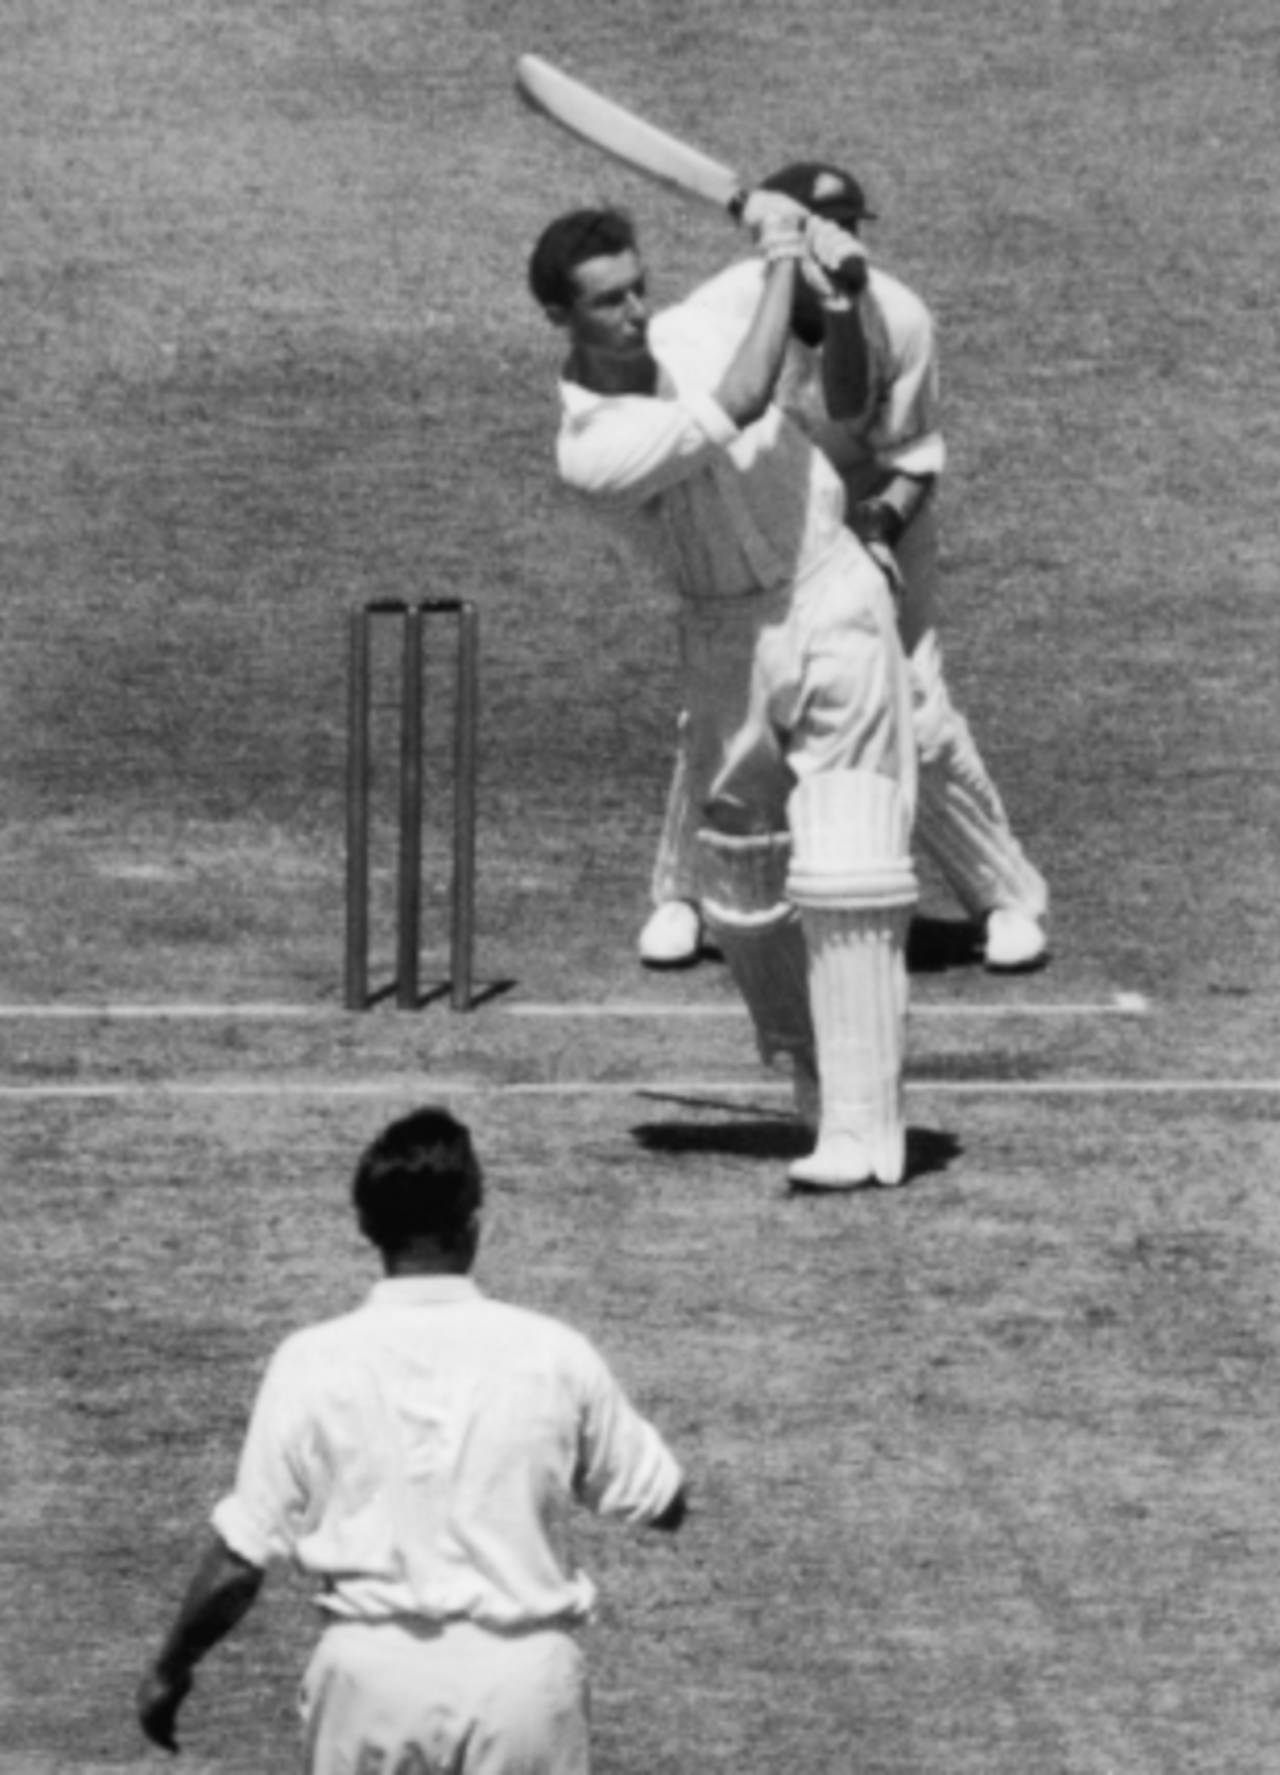 Reg Simpson during one of his most memorable innings, his 156 not out against Australia at the MCG in 1950-51&nbsp;&nbsp;&bull;&nbsp;&nbsp;Getty Images